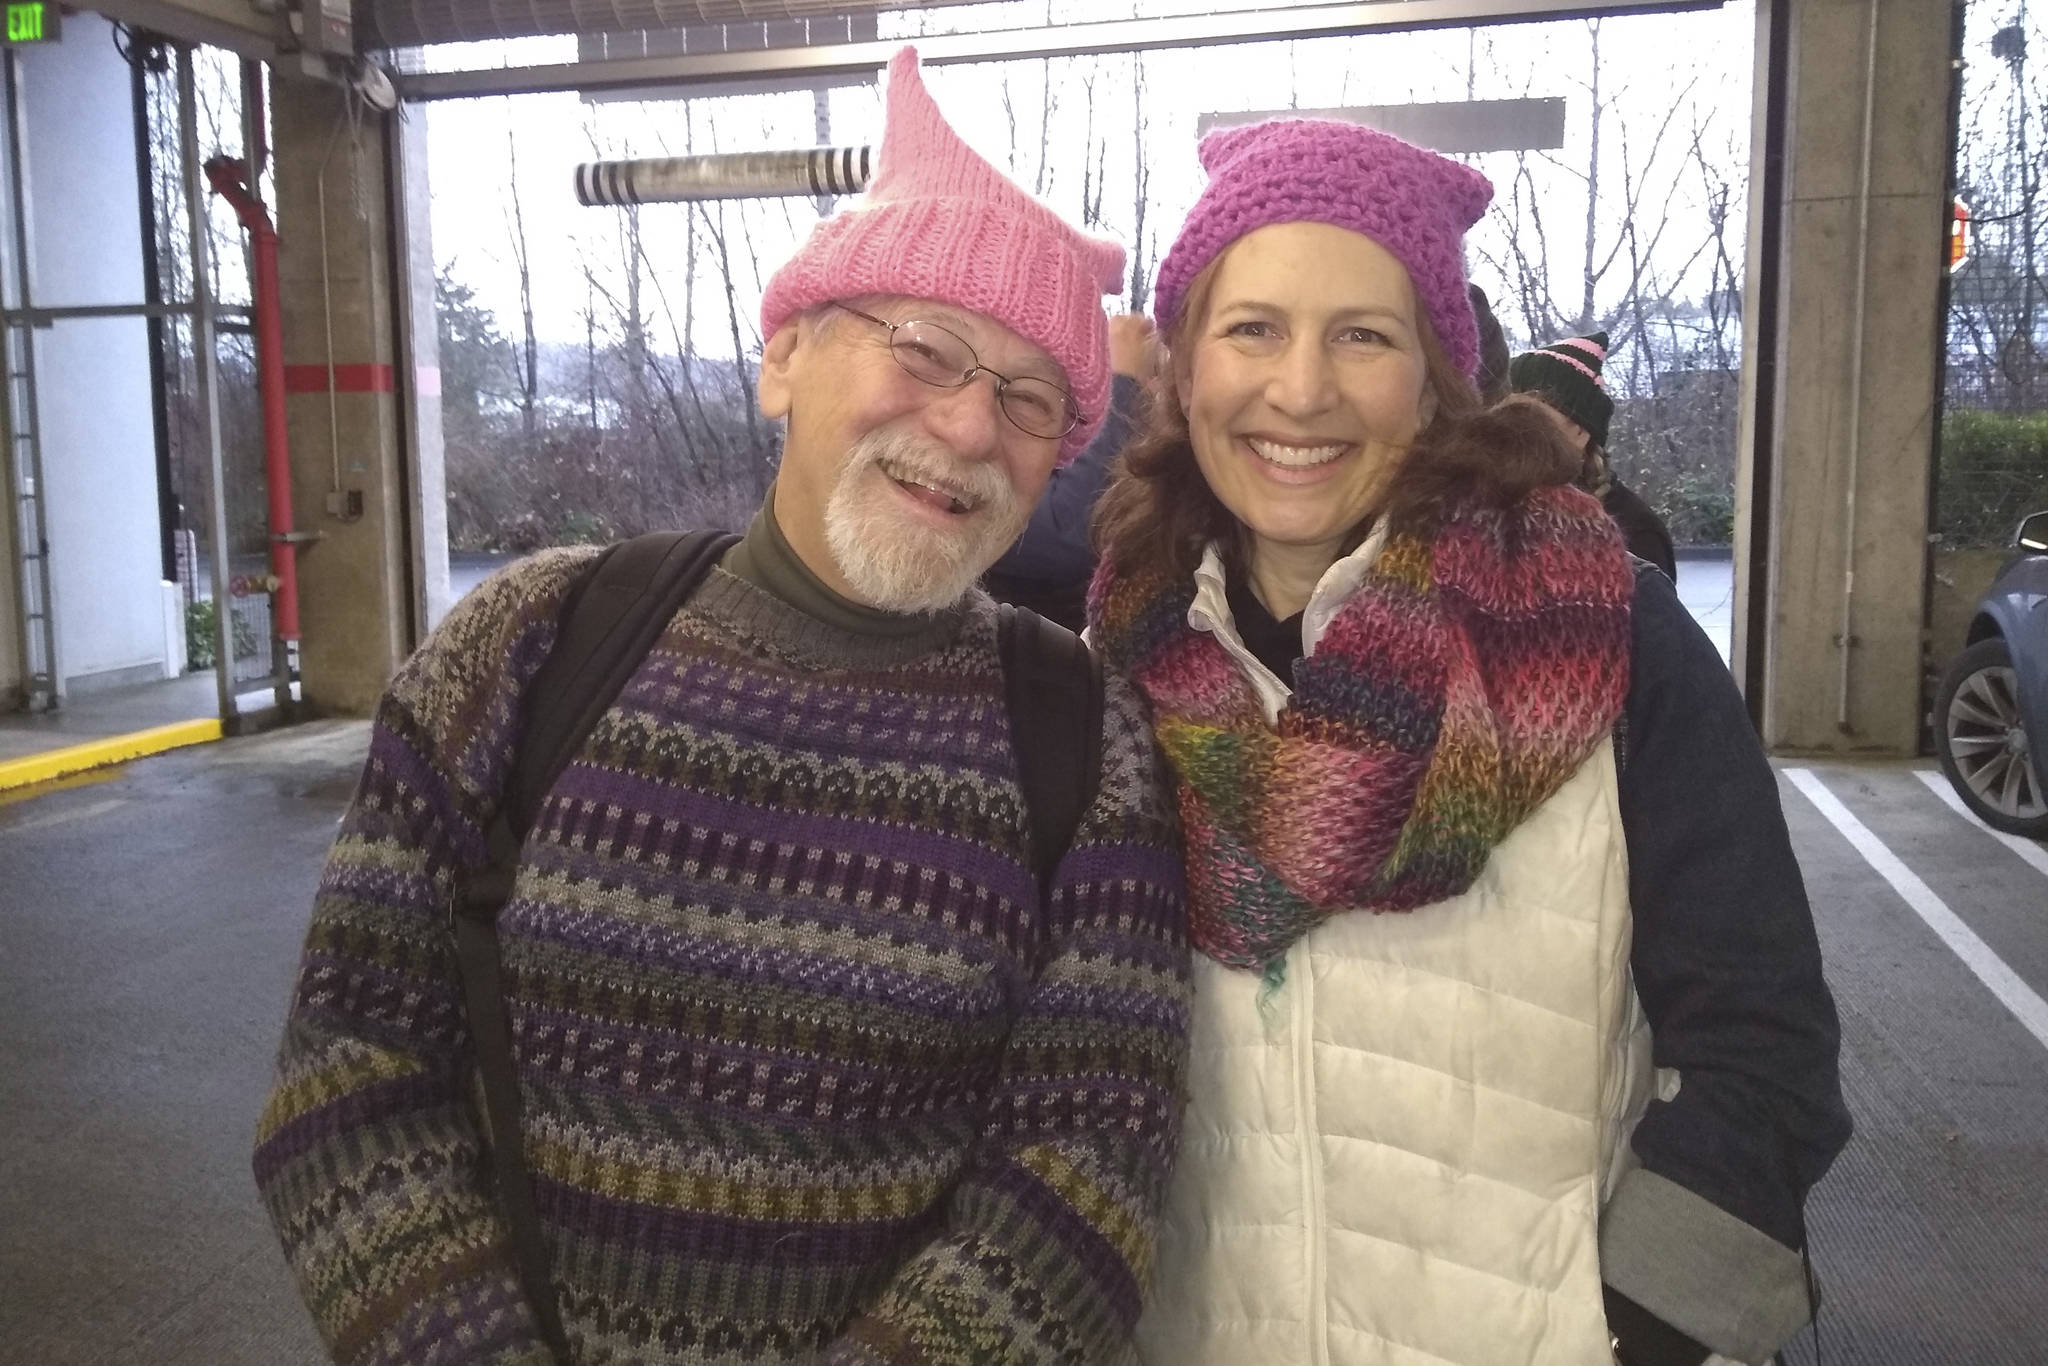 Record columnist Roger Ledbetter and Congressional District 8 Rep. Kim Schrier pose for a photo before the Womxn’s March in Seattle. Photo courtesy of Roger Ledbetter